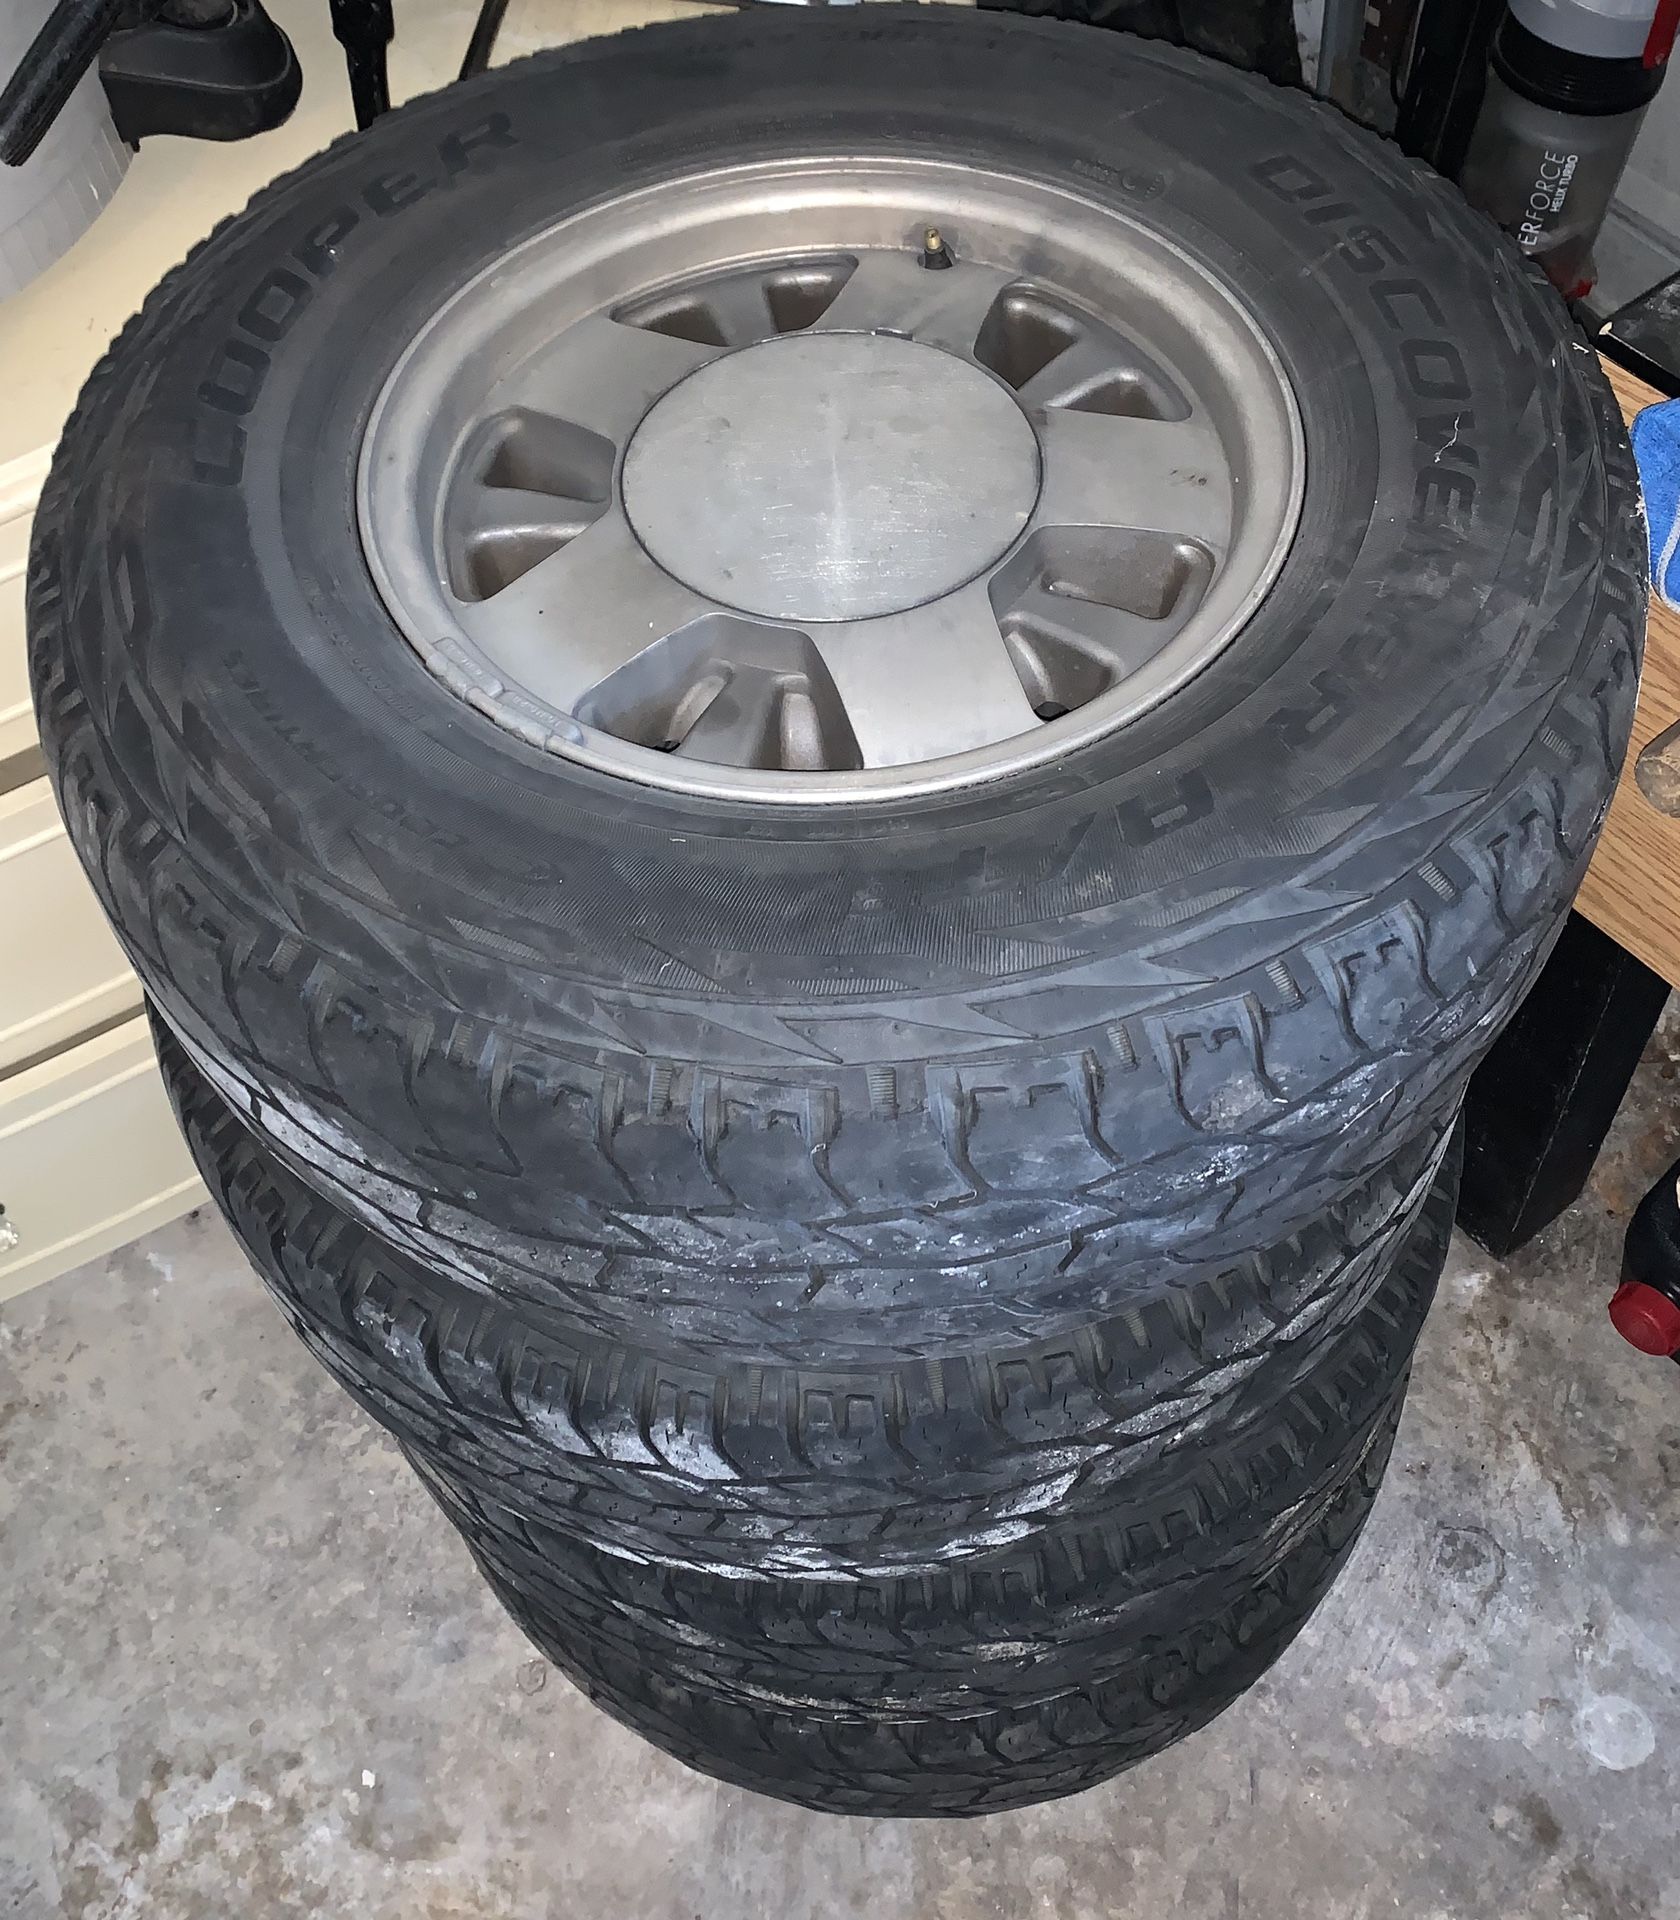 Chevy truck tires